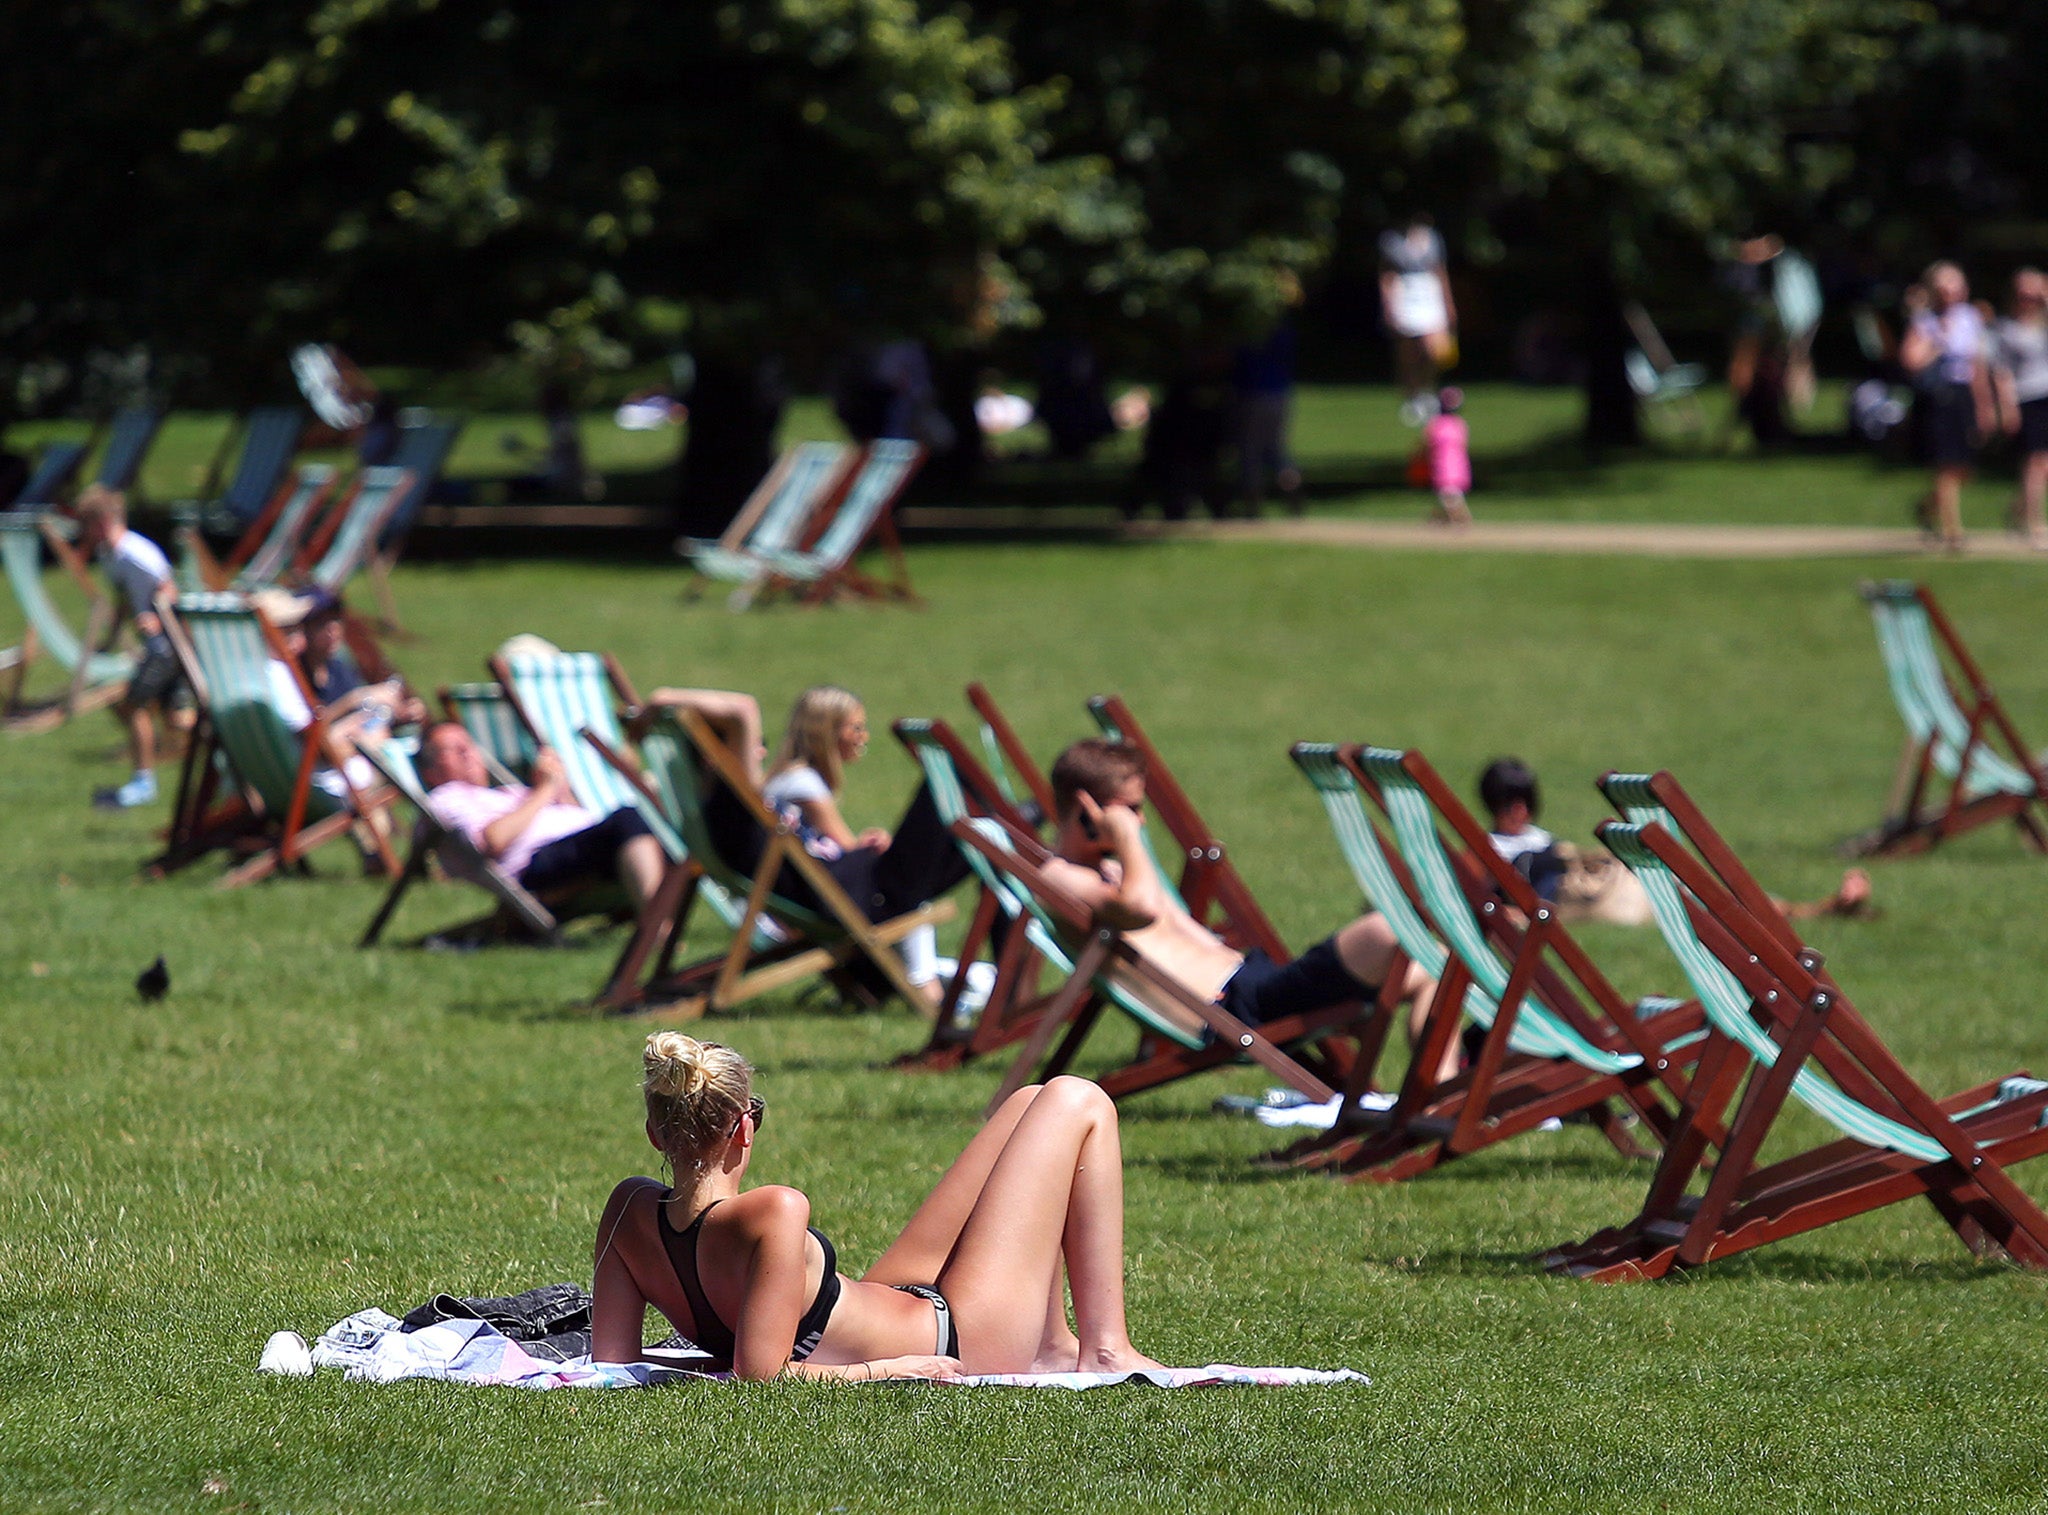 Sunbathers enjoy the hot weather in St James' Park in central London